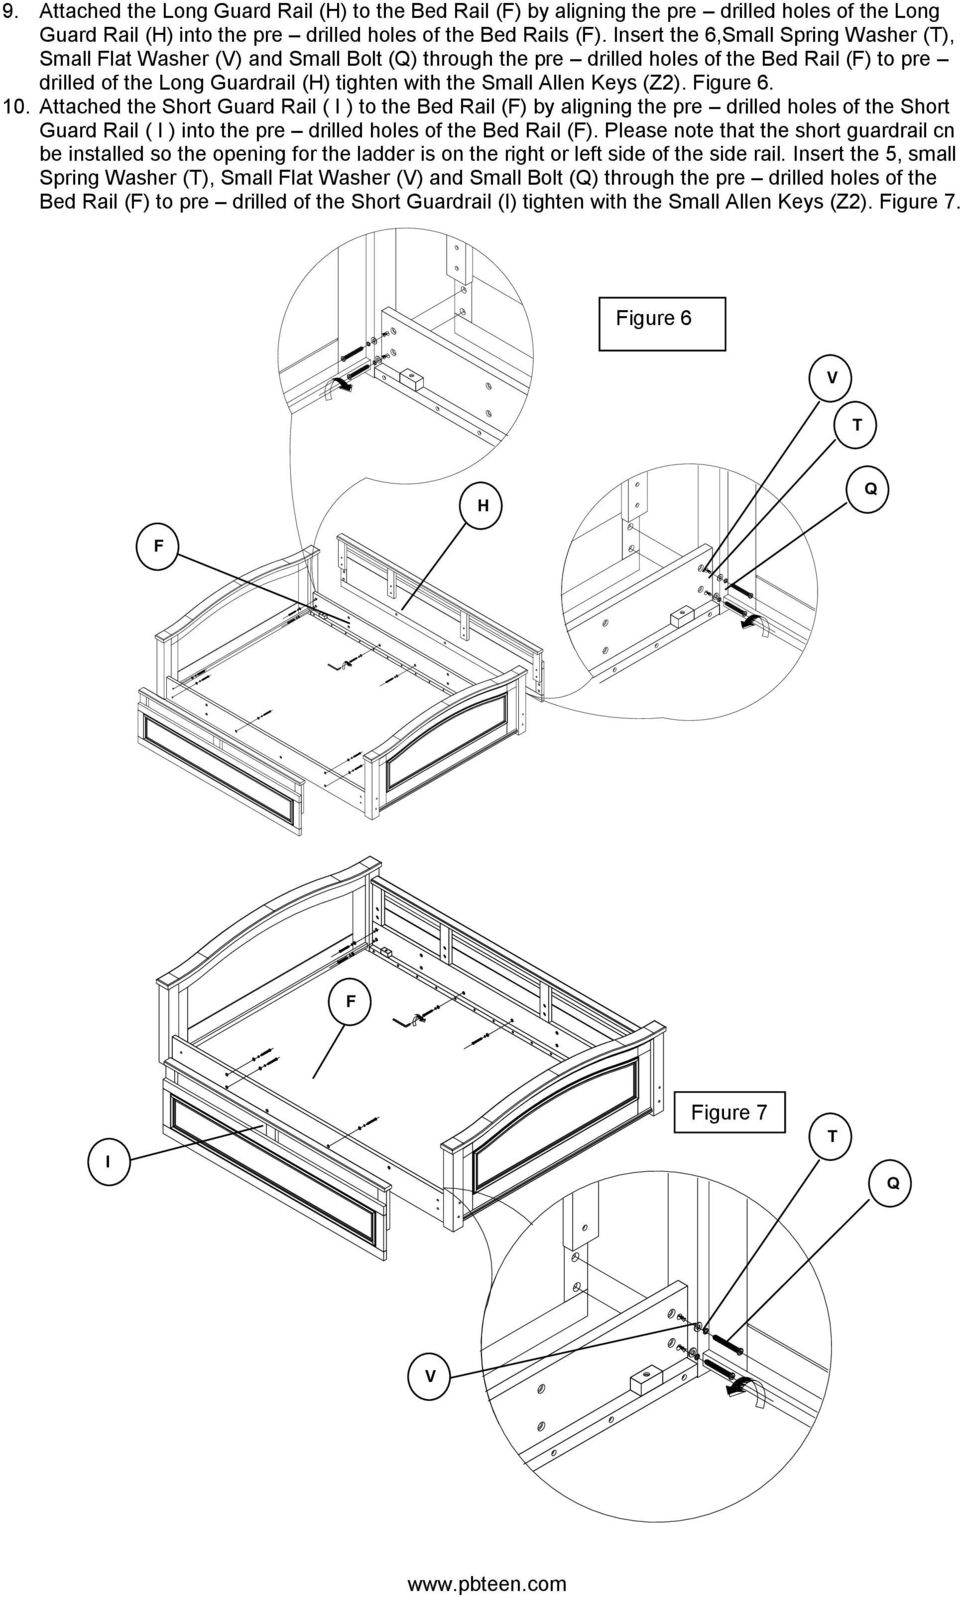 Keys (Z2). Figure 6. 10. Attached the Short Guard Rail ( I ) to the Bed Rail (F) by aligning the pre drilled holes of the Short Guard Rail ( I ) into the pre drilled holes of the Bed Rail (F).